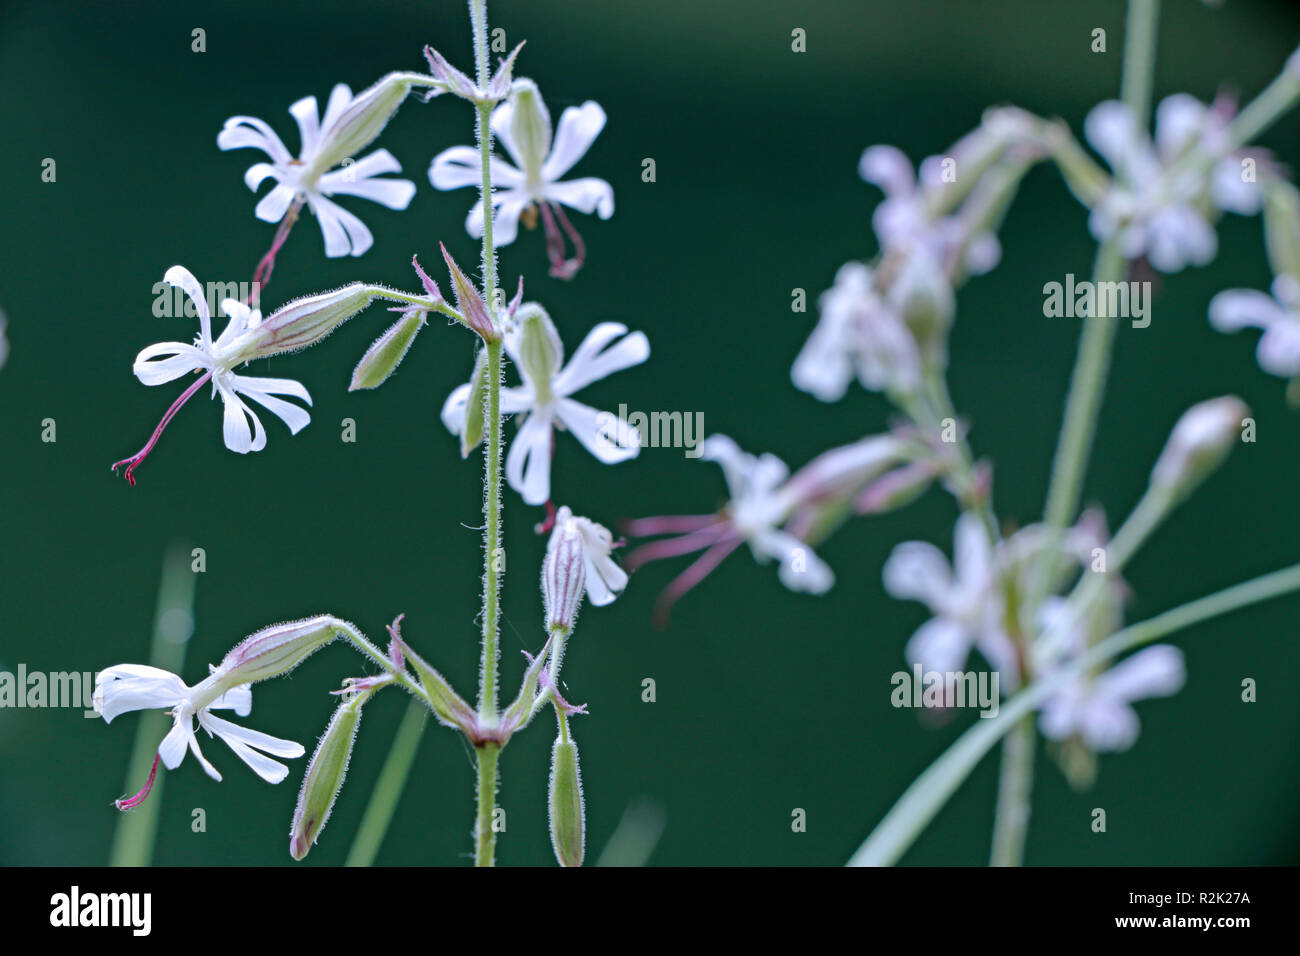 Flowers, forked catchfly, Silene dichotoma, Stock Photo